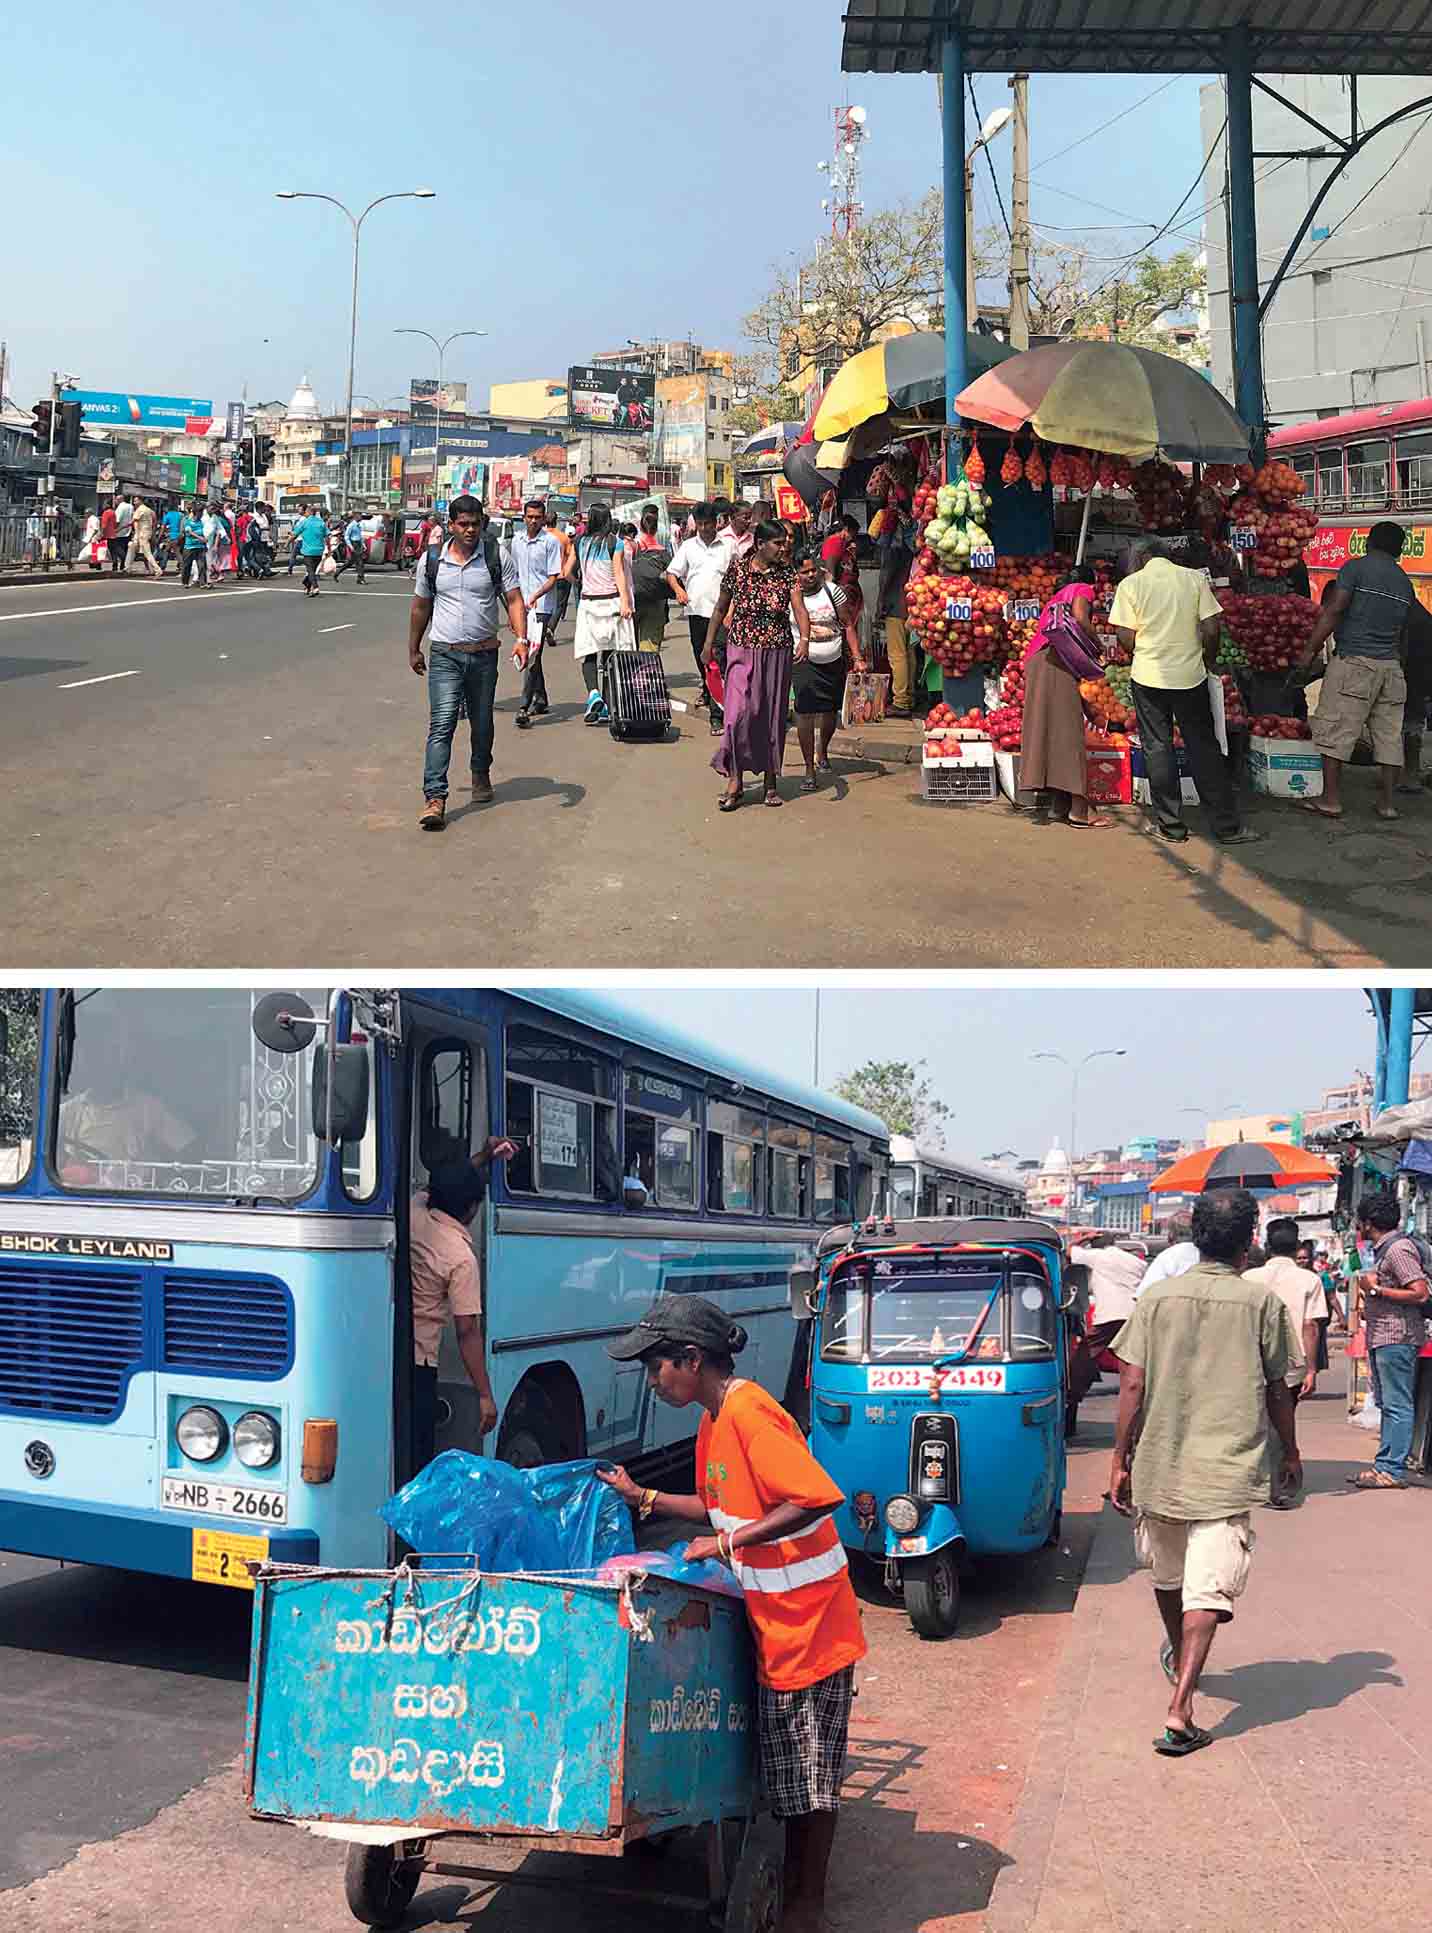 gendered-production-spaces-pettah-friday-morning-front-sltb-bus-terminal-woman-colombo-municipal-council-cleaning-service